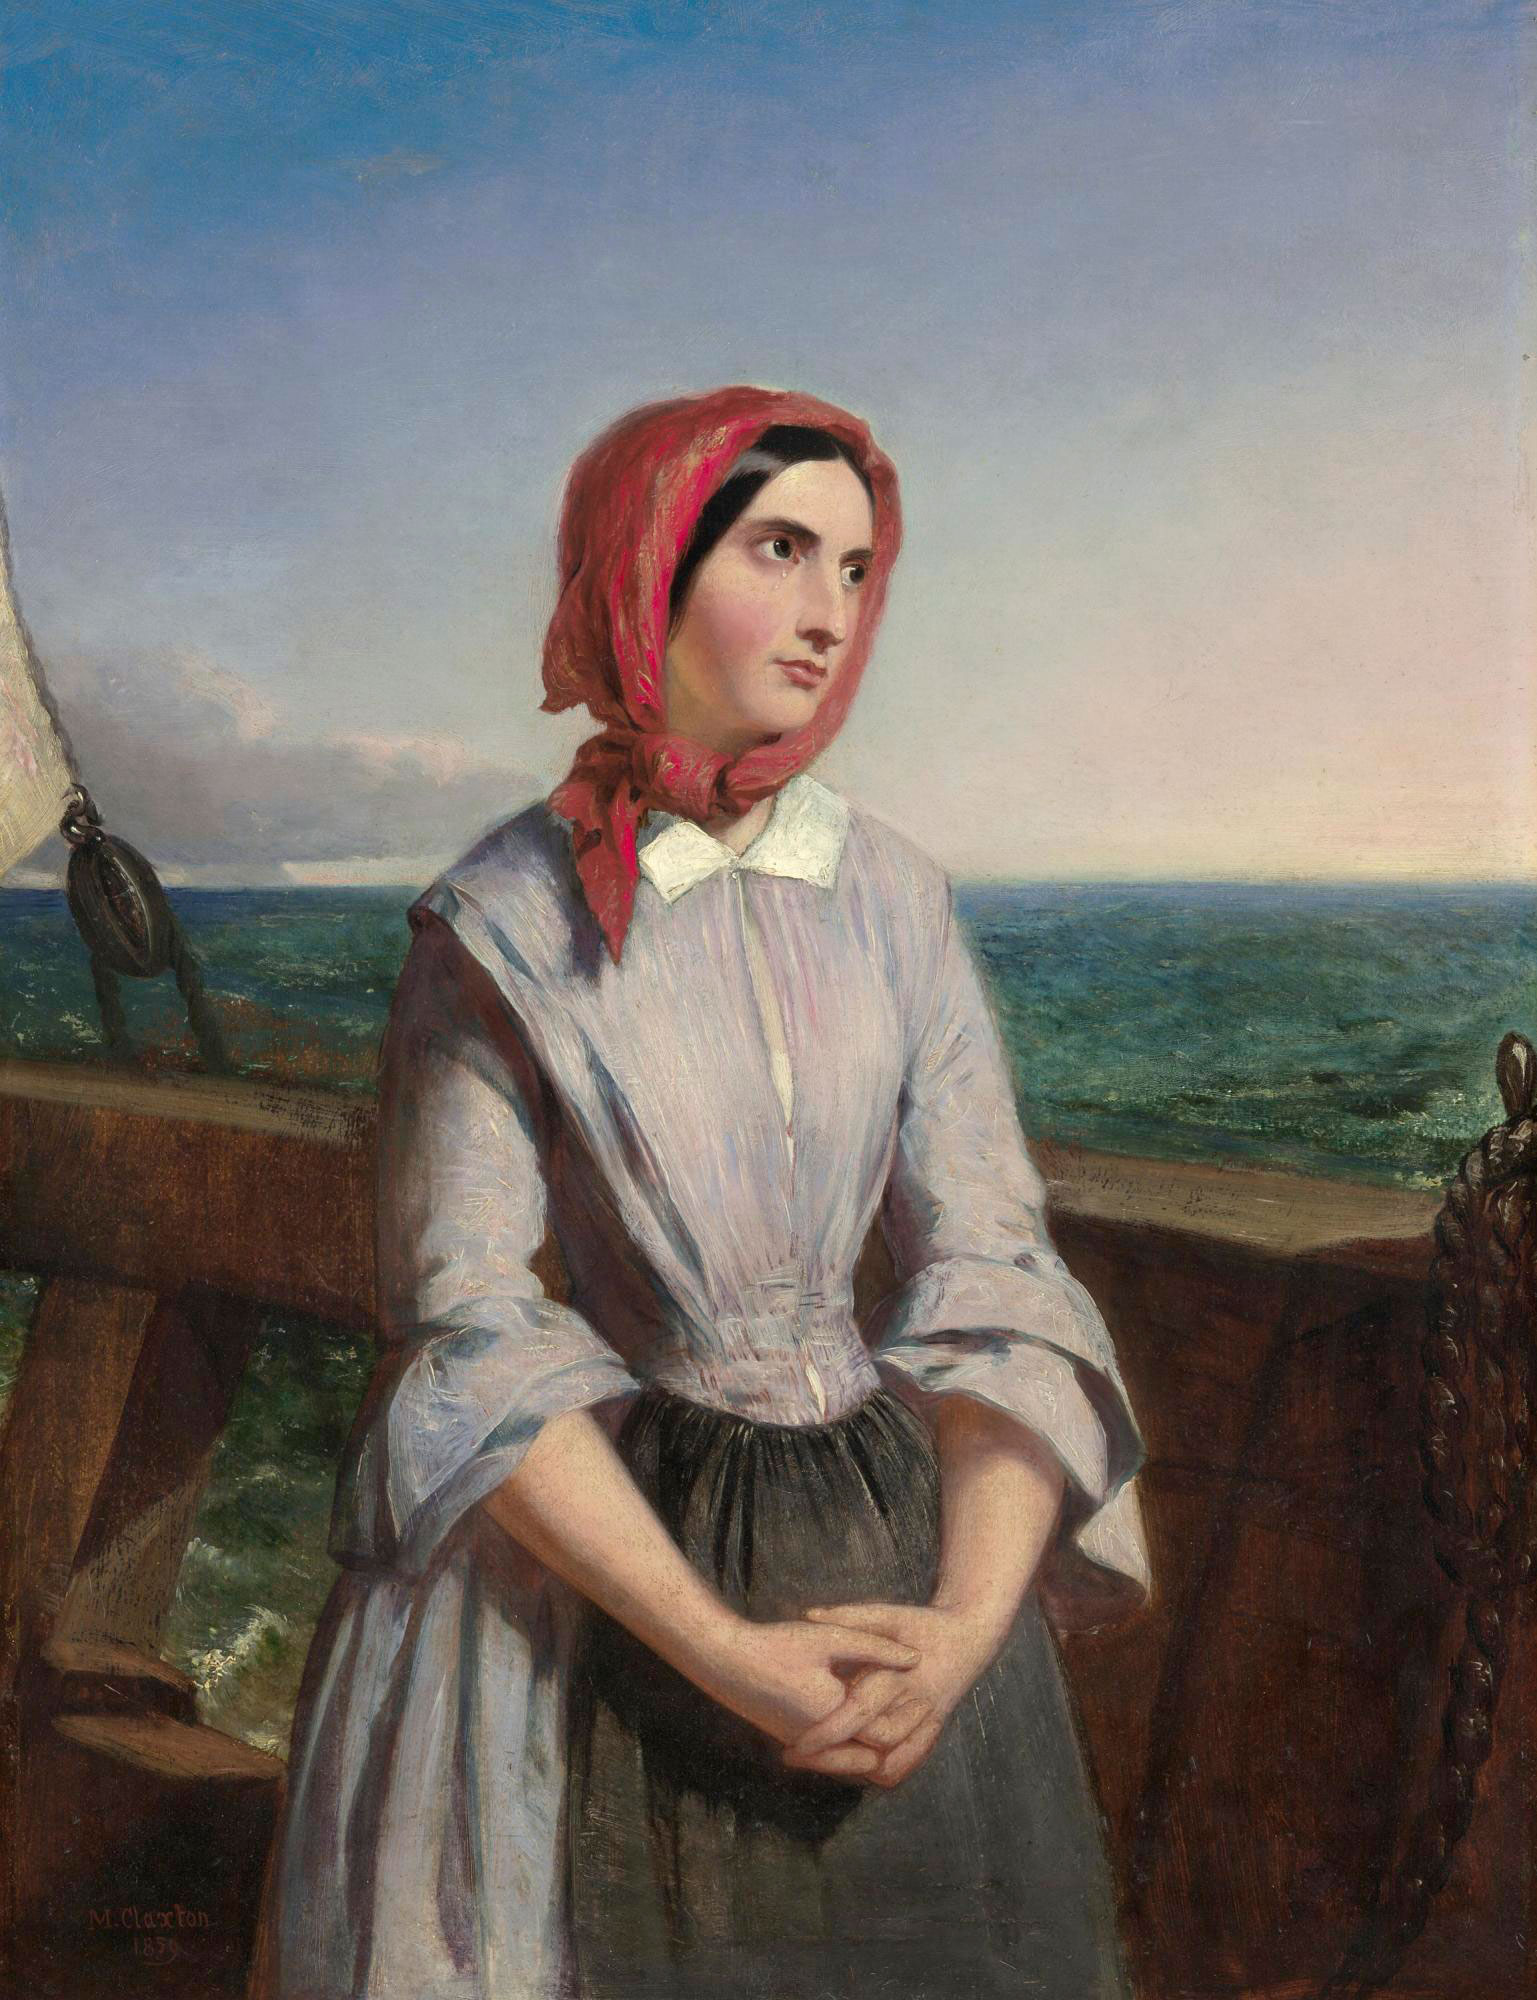 An emigrant’s thoughts of home by Marshall Claxton, 1859